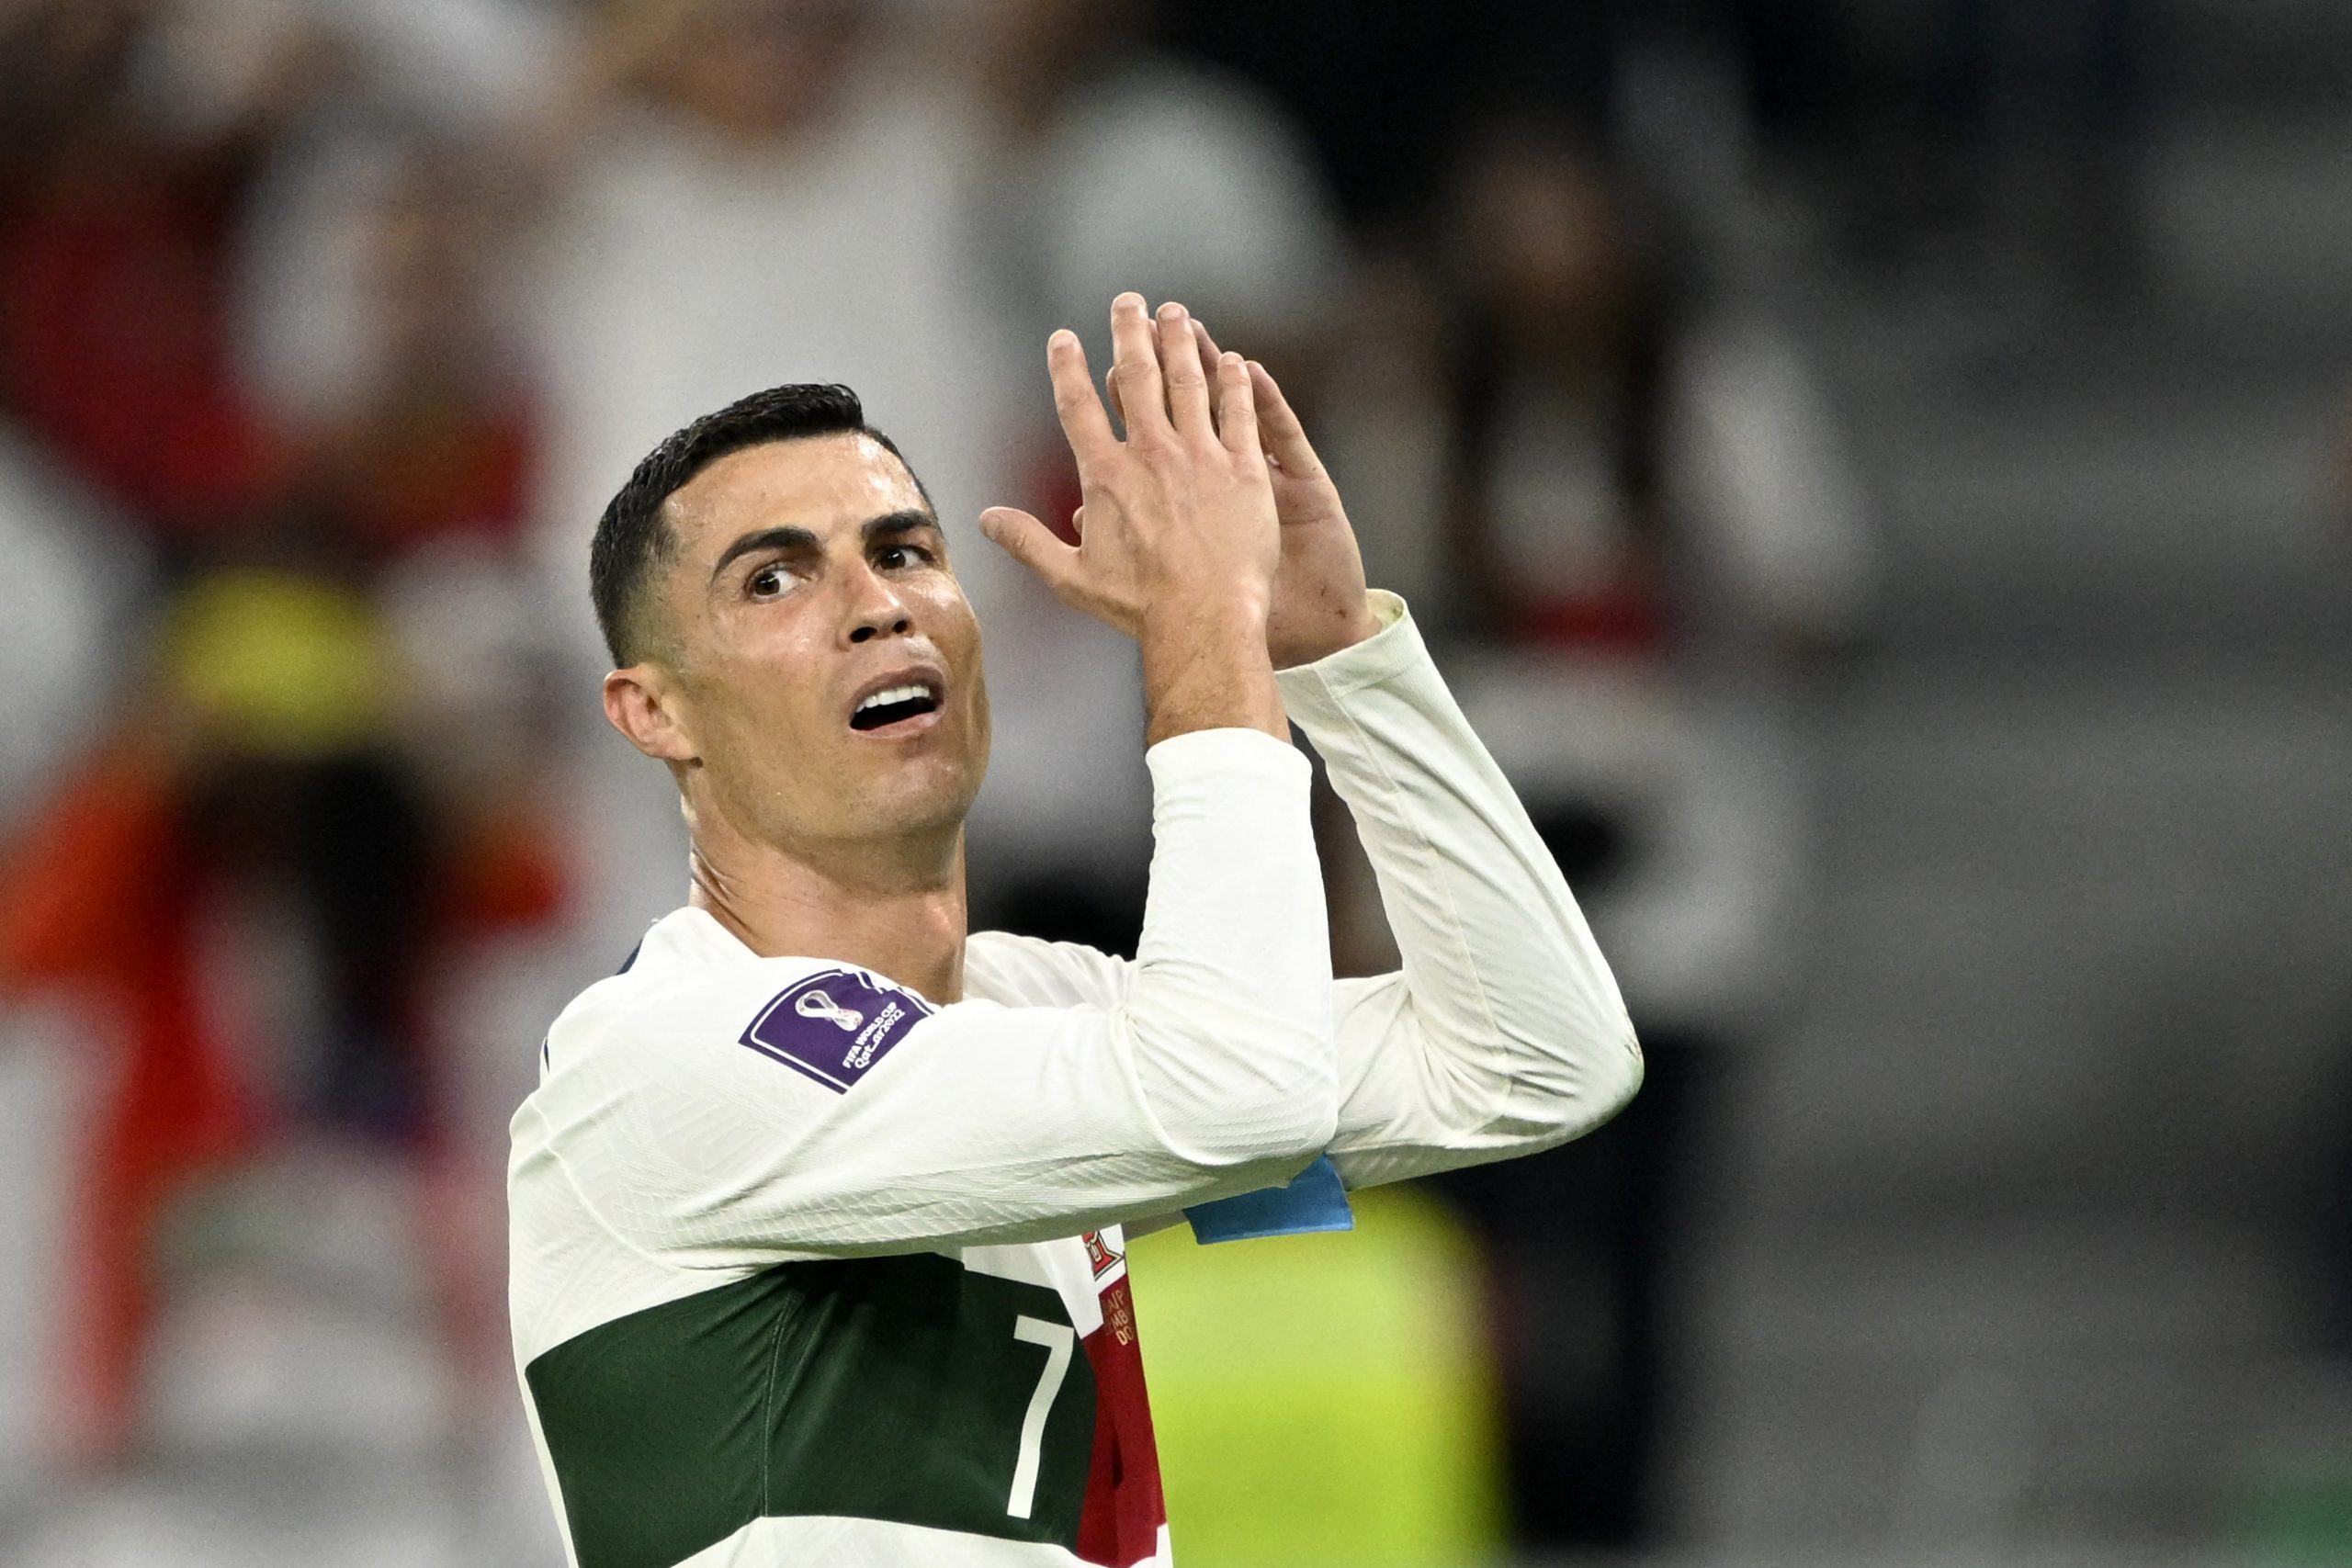 Portugal's forward #07 Cristiano Ronaldo reacts during the Qatar 2022 World Cup Group H football match between South Korea and Portugal at the Education City Stadium in Al-Rayyan, west of Doha on December 2, 2022